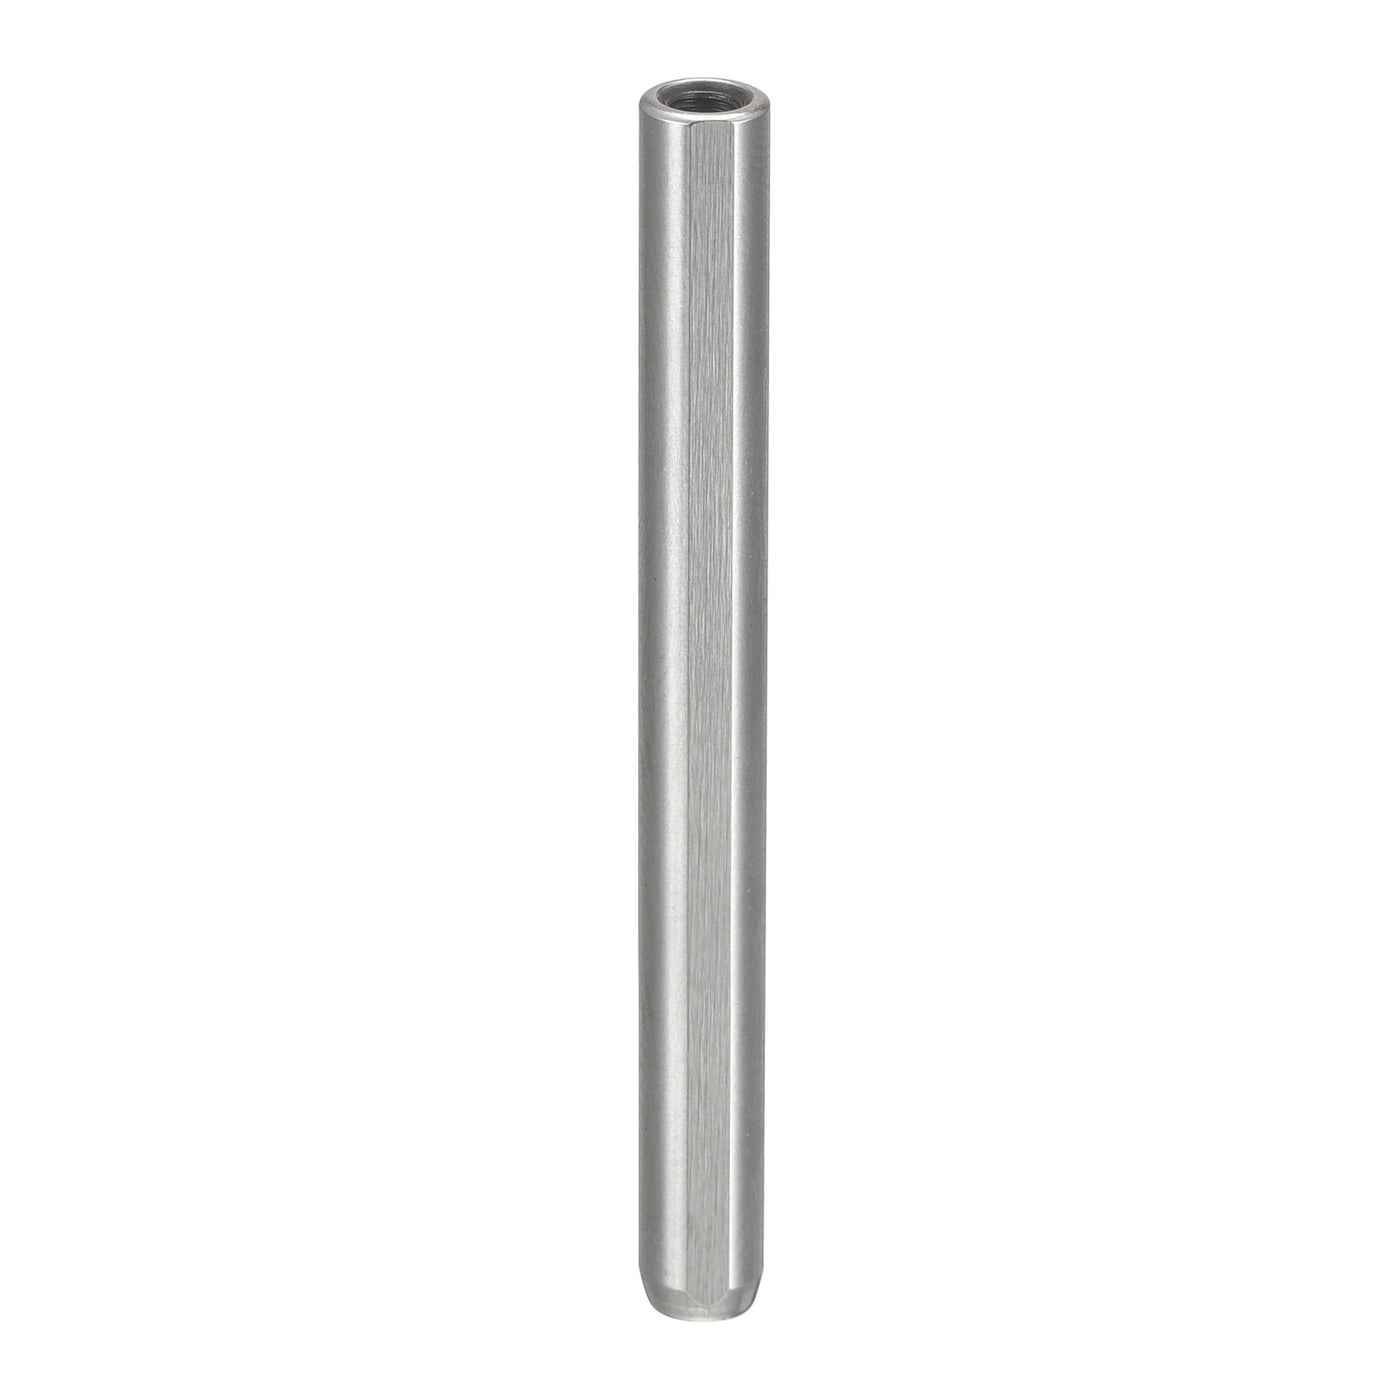 uxcell Uxcell M3 Internal Thread Dowel Pin 5x50mm Chamfering Flat Exhaust Groove Pin